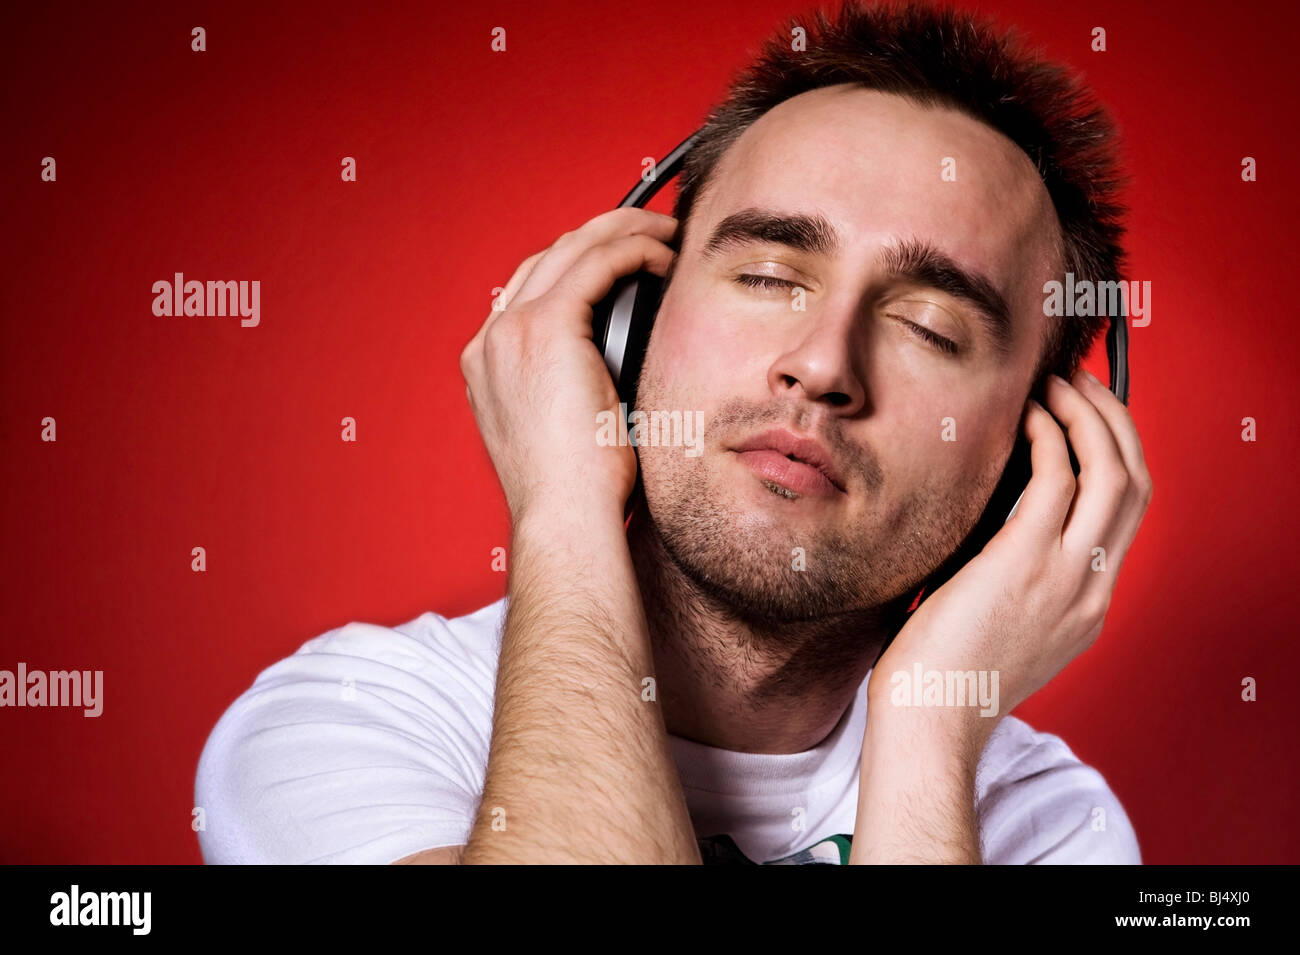 young man listening to the music with eyes closed Stock Photo